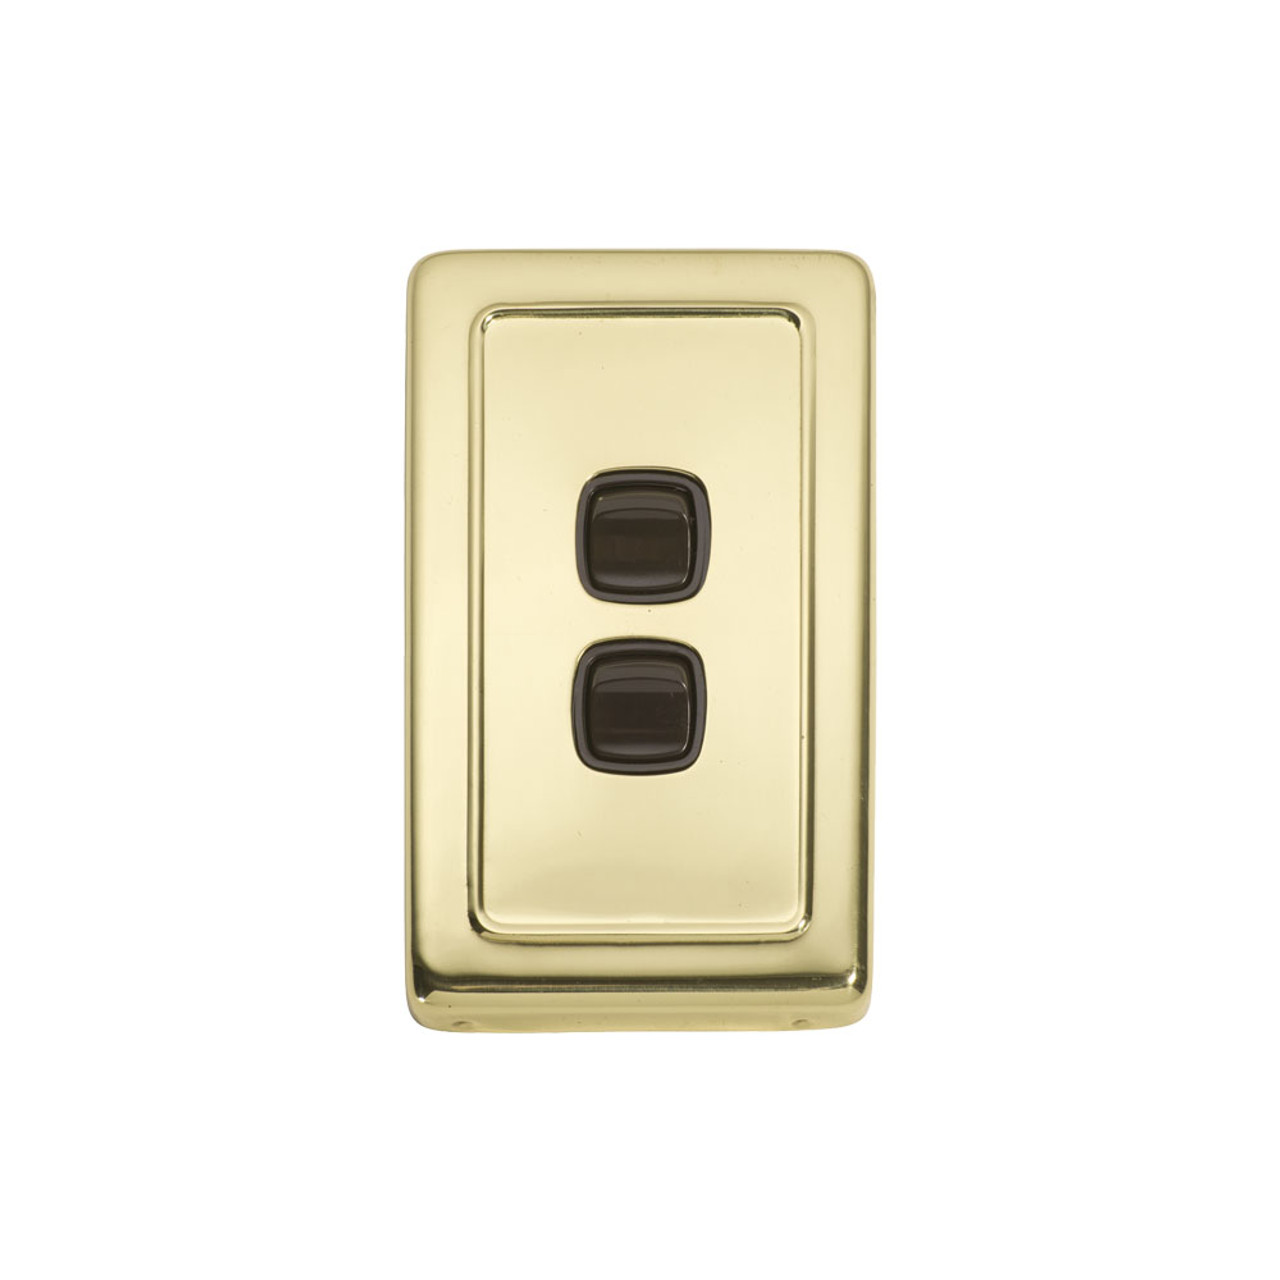 Classic 2 Gang Flat Plate Heritage Light Switch - Polished Brass Plate with Brown Rocker